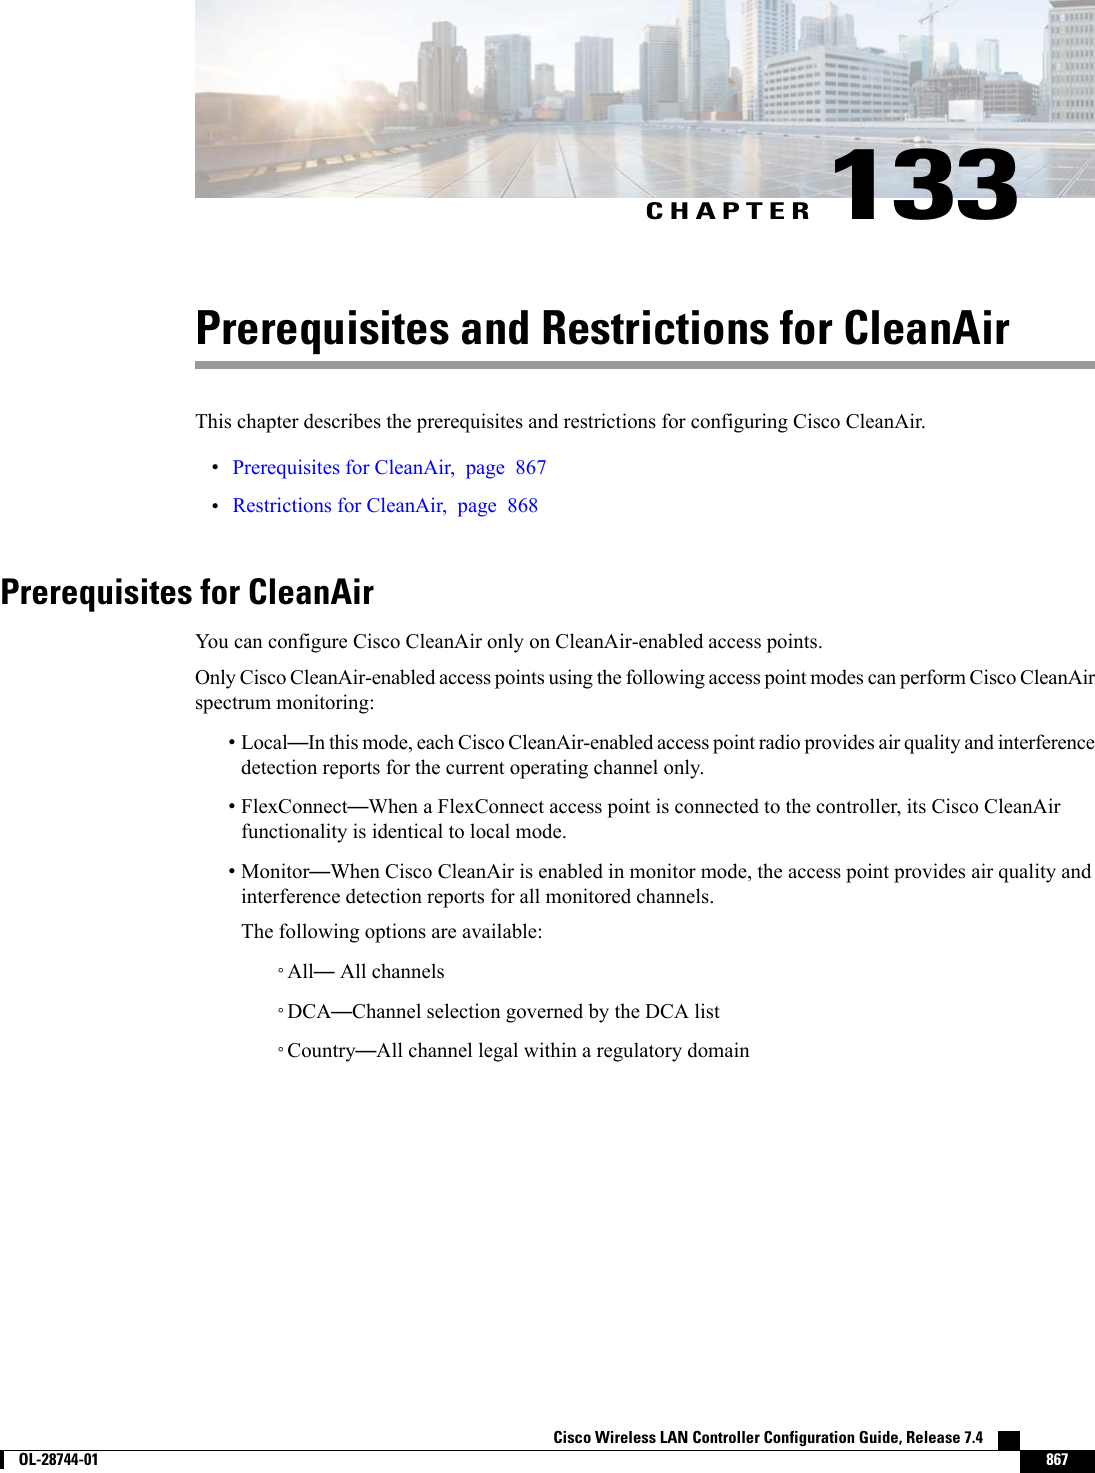 CHAPTER 133Prerequisites and Restrictions for CleanAirThis chapter describes the prerequisites and restrictions for configuring Cisco CleanAir.•Prerequisites for CleanAir, page 867•Restrictions for CleanAir, page 868Prerequisites for CleanAirYou can configure Cisco CleanAir only on CleanAir-enabled access points.Only Cisco CleanAir-enabled access points using the following access point modes can perform Cisco CleanAirspectrum monitoring:•Local—In this mode, each Cisco CleanAir-enabled access point radio provides air quality and interferencedetection reports for the current operating channel only.•FlexConnect—When a FlexConnect access point is connected to the controller, its Cisco CleanAirfunctionality is identical to local mode.•Monitor—When Cisco CleanAir is enabled in monitor mode, the access point provides air quality andinterference detection reports for all monitored channels.The following options are available:◦All—All channels◦DCA—Channel selection governed by the DCA list◦Country—All channel legal within a regulatory domainCisco Wireless LAN Controller Configuration Guide, Release 7.4        OL-28744-01 867